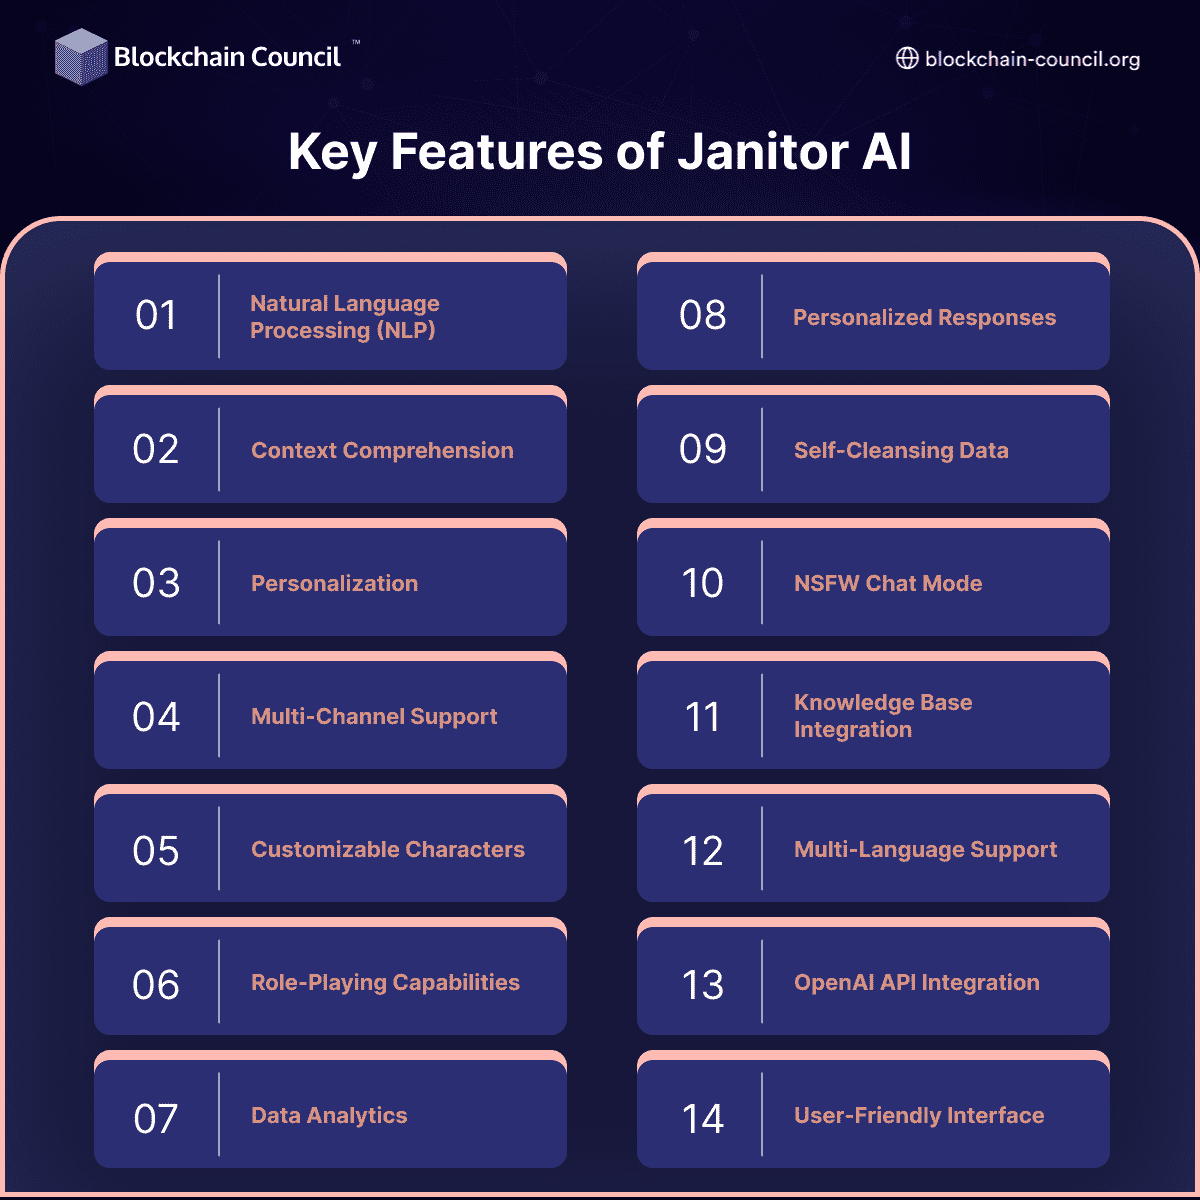 Key Features of Janitor AI (1)